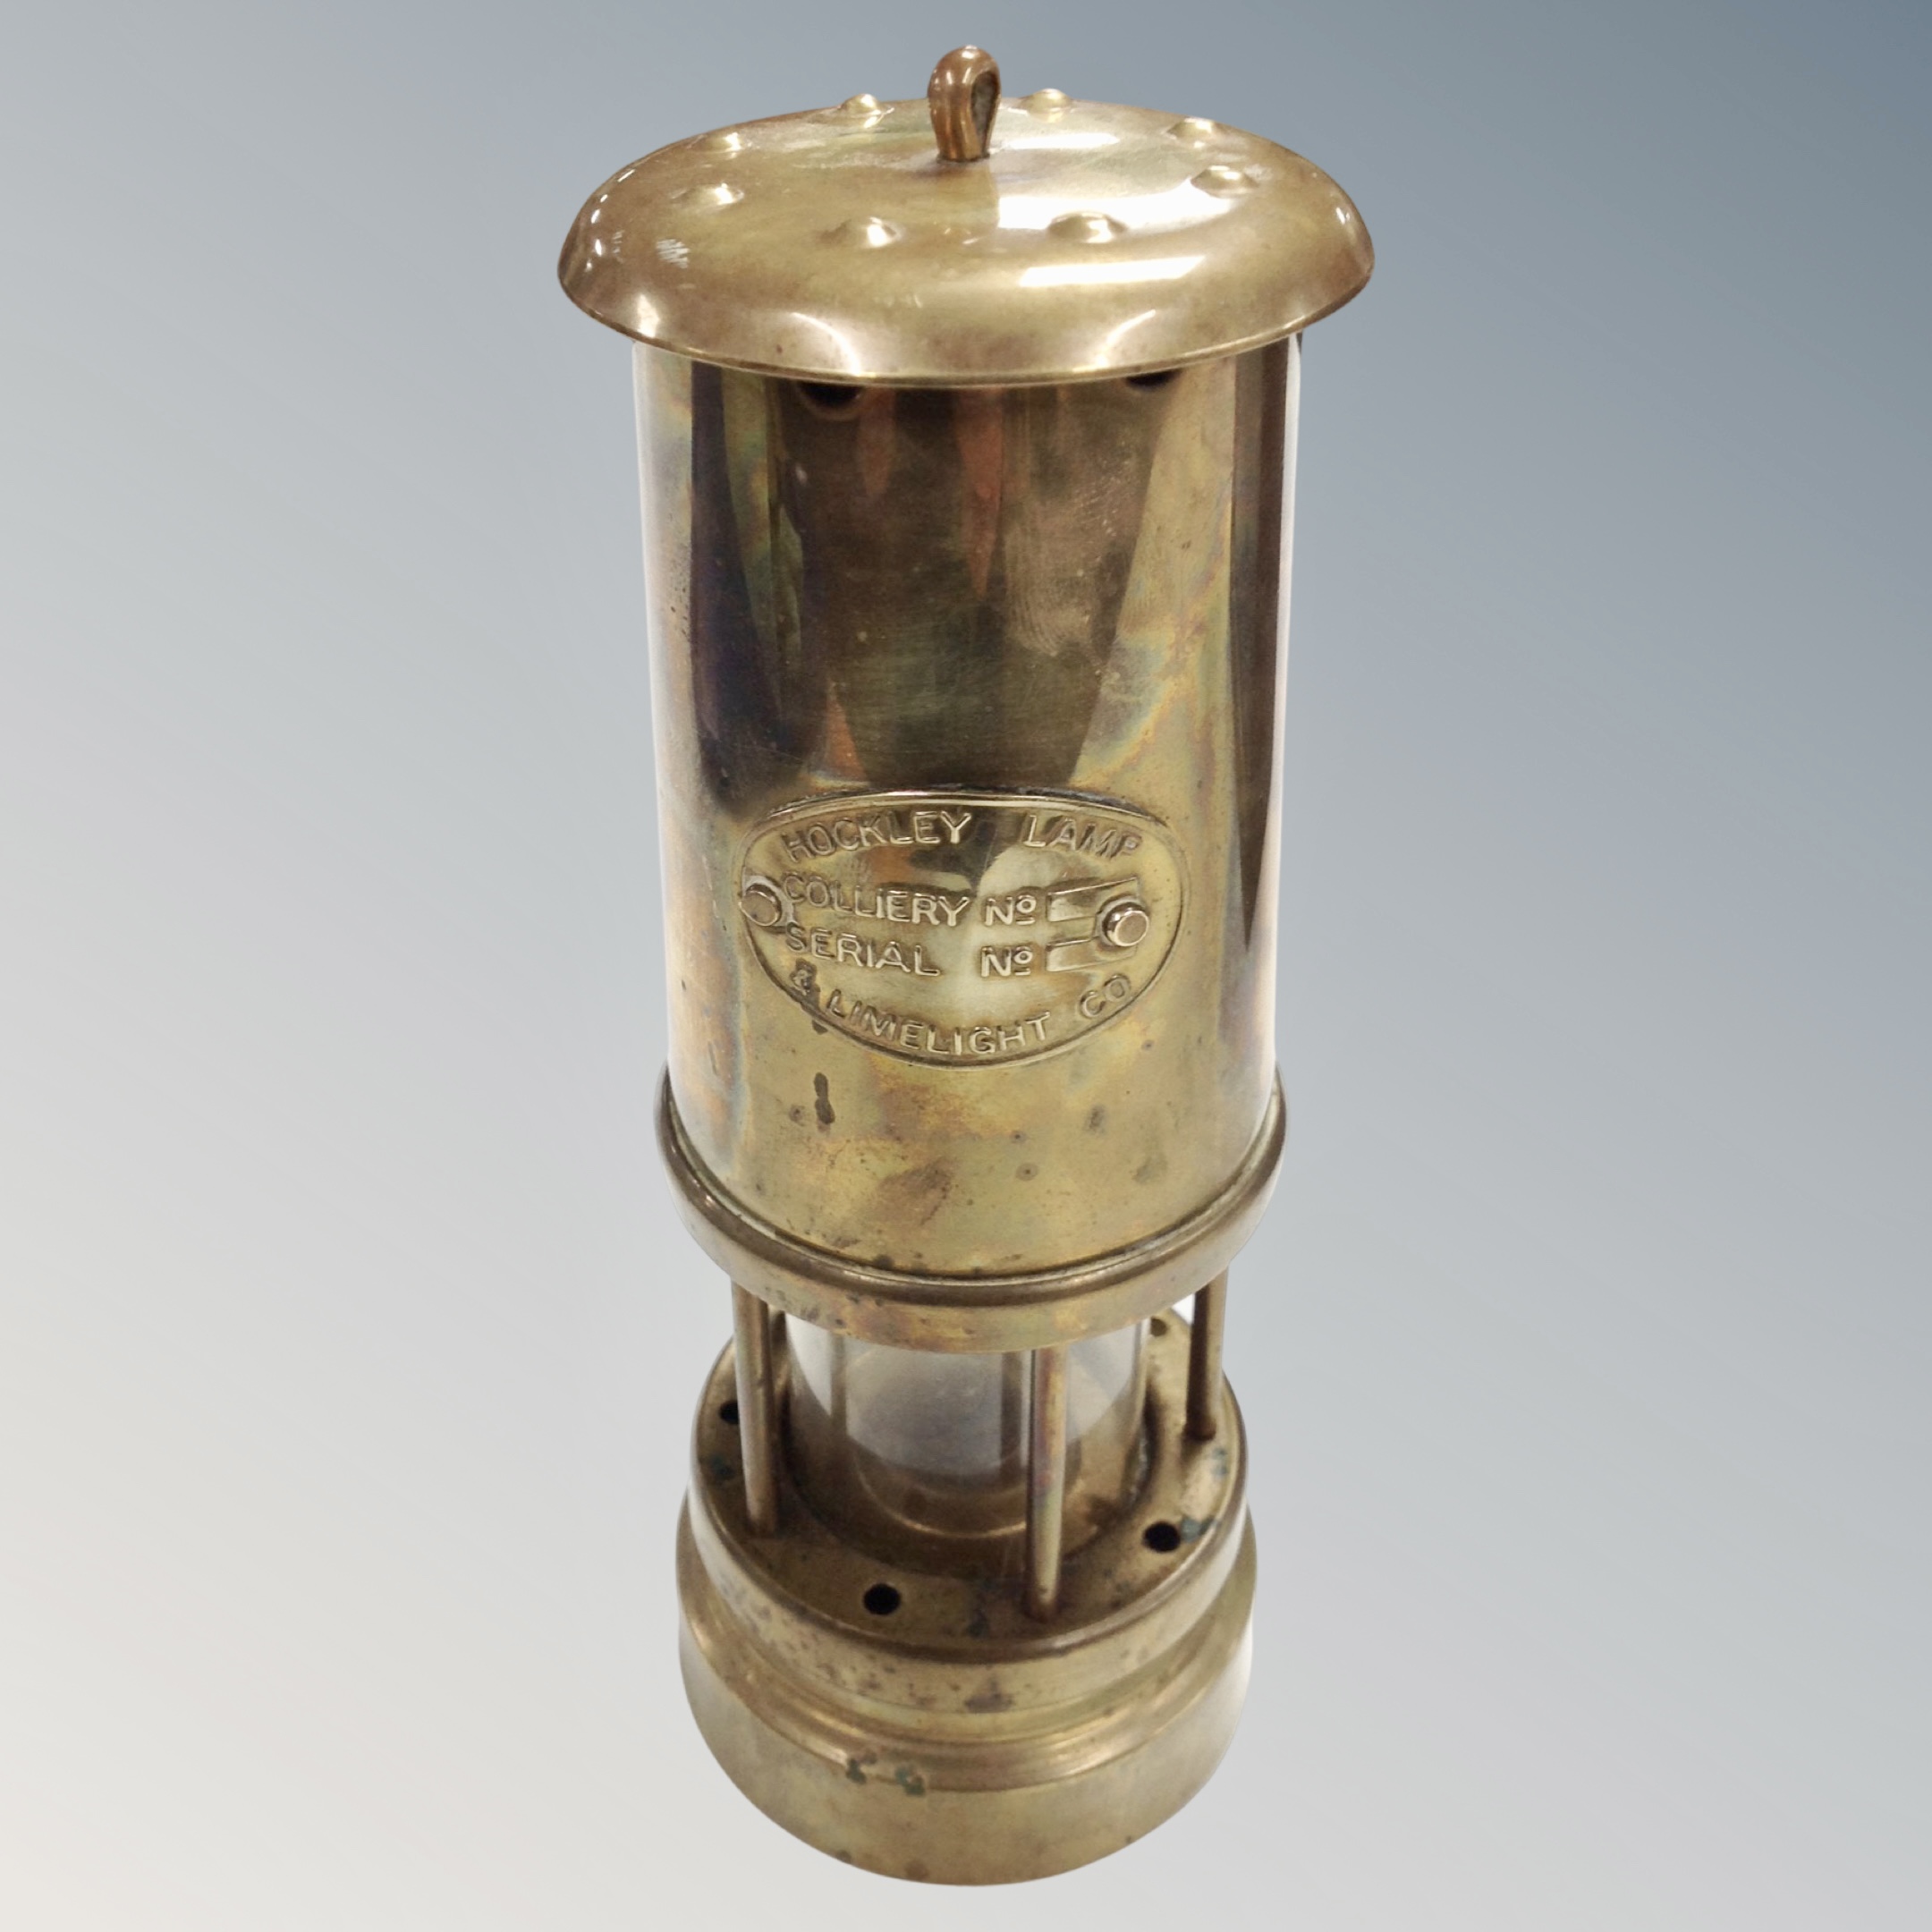 A Hockley Lamp & Limelight Company brass miner's lamp